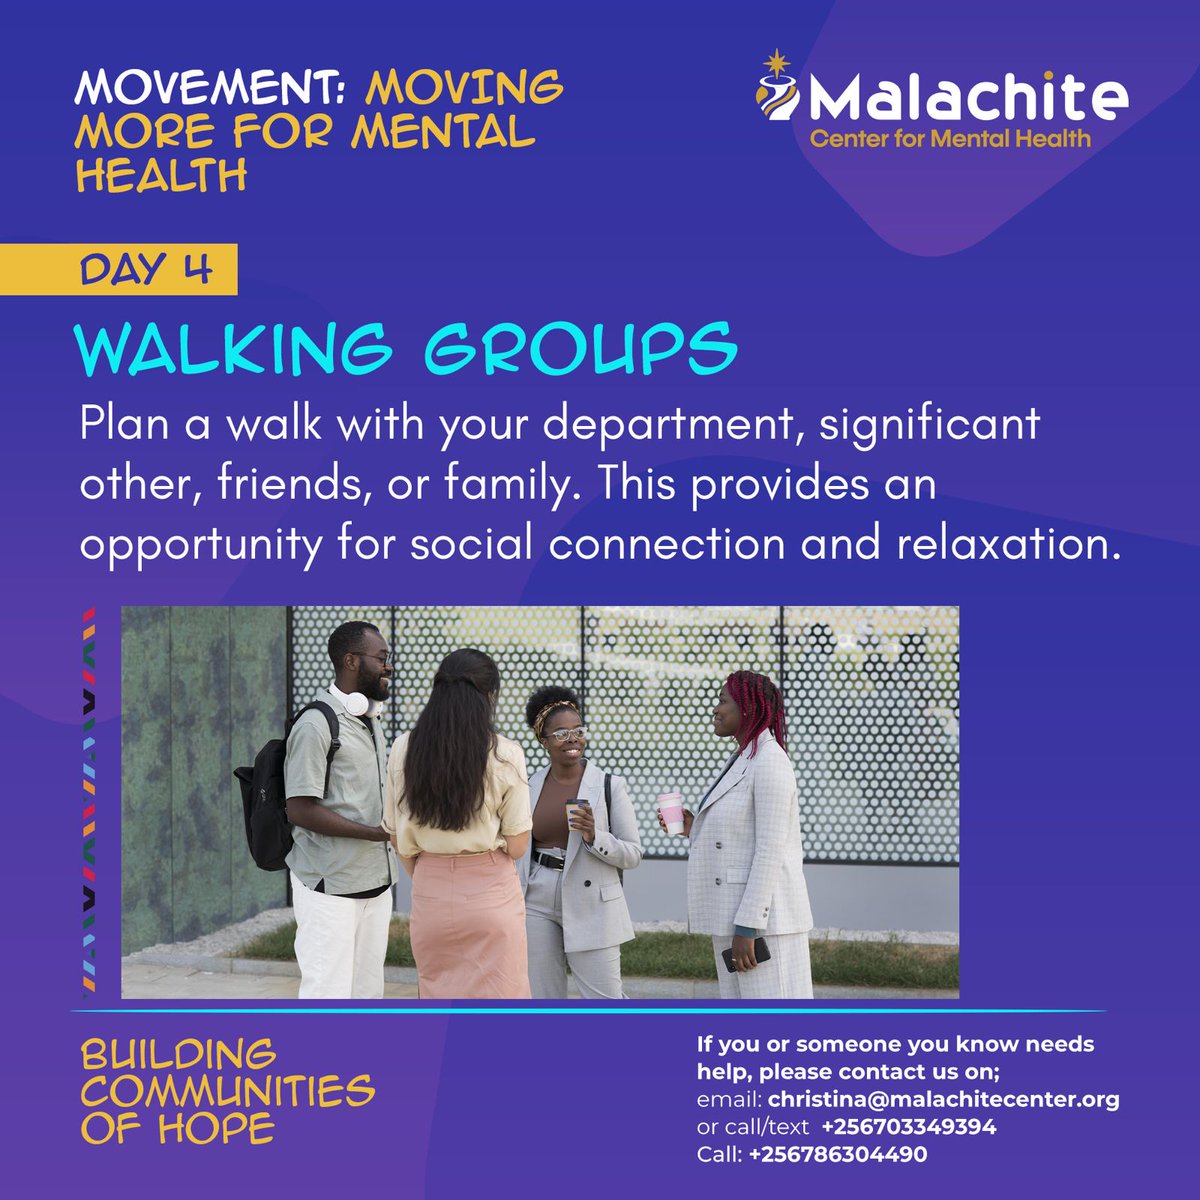 Plan a walk with your department, significant other, friends, or family. This provides an opportunity for social connection and relaxation.

#MentalHealthAwarenessWeek
#MovementForMentalHealth
#MentalHealthUganda
#MalachiteMedia